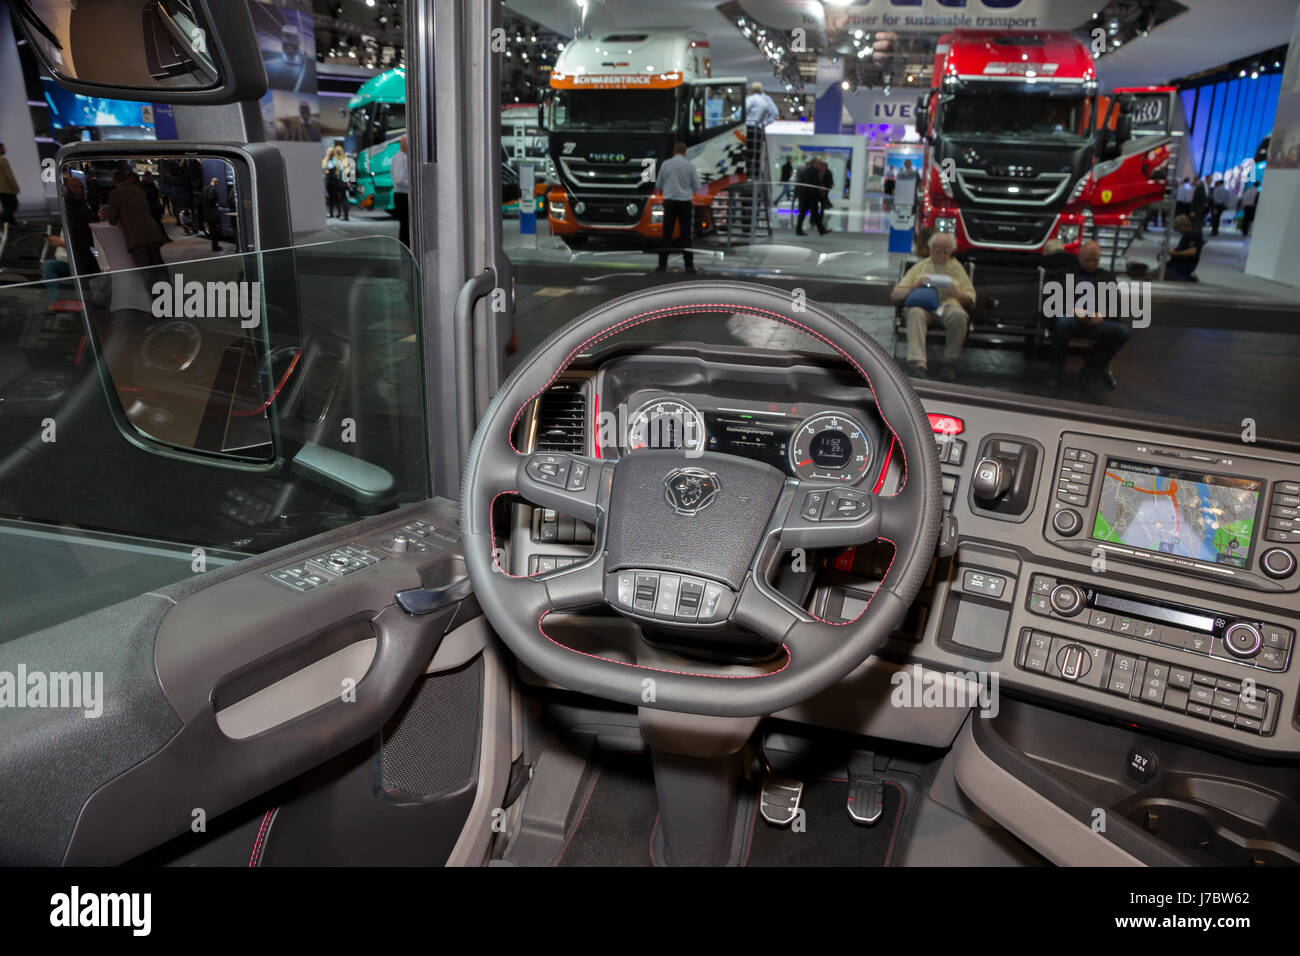 HANNOVER, GERMANY - SEP 21, 2016: New Scania truck interior at the  International Motor Show for Commercial Vehicles Stock Photo - Alamy